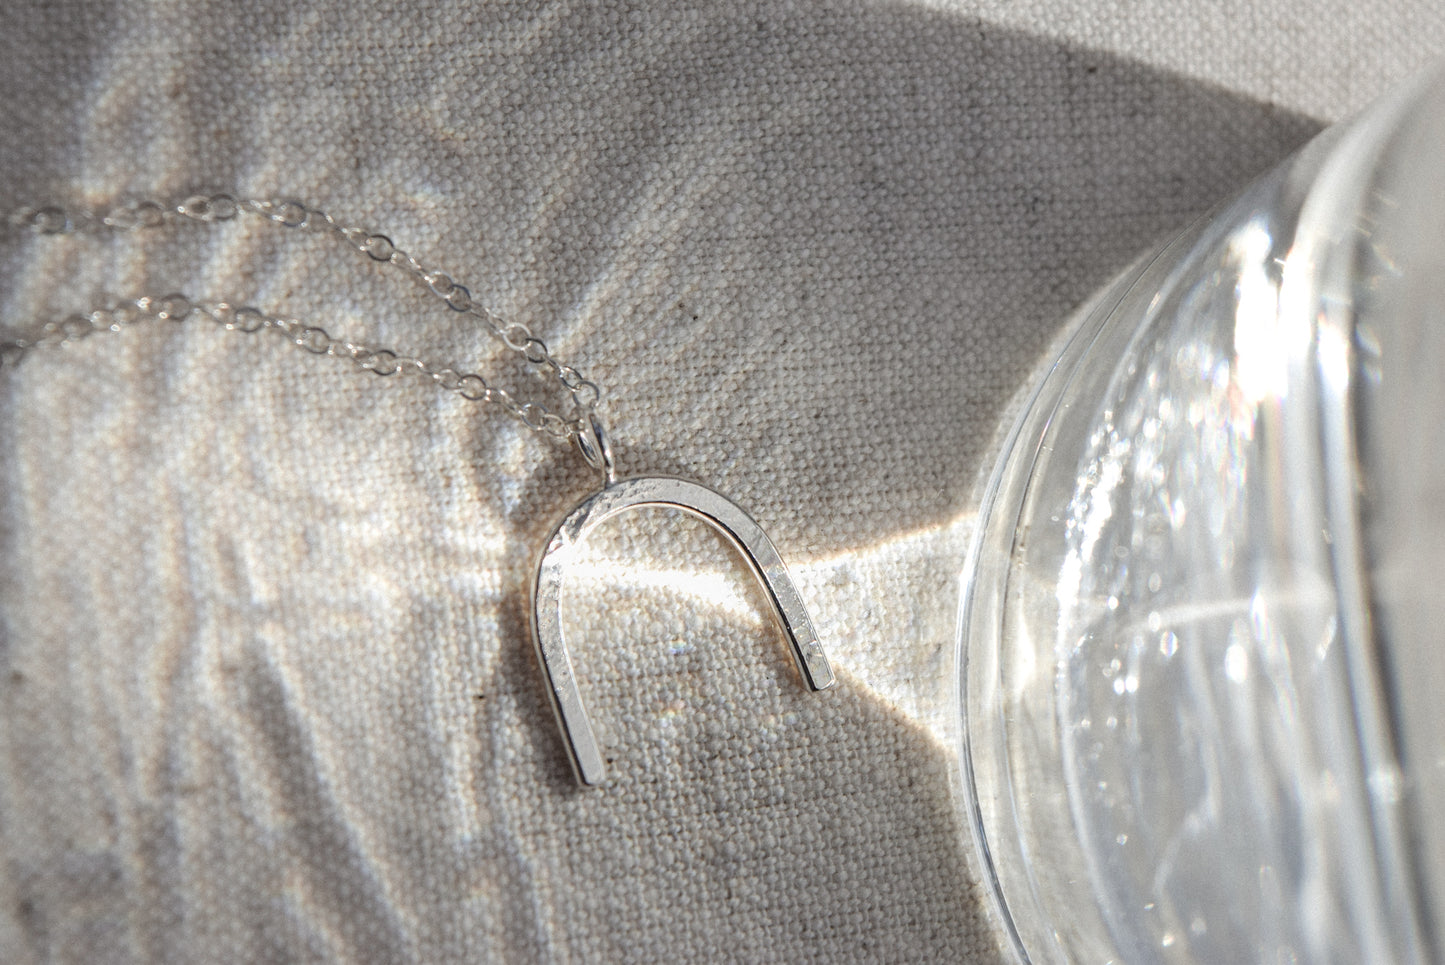 Silver Arch Necklace